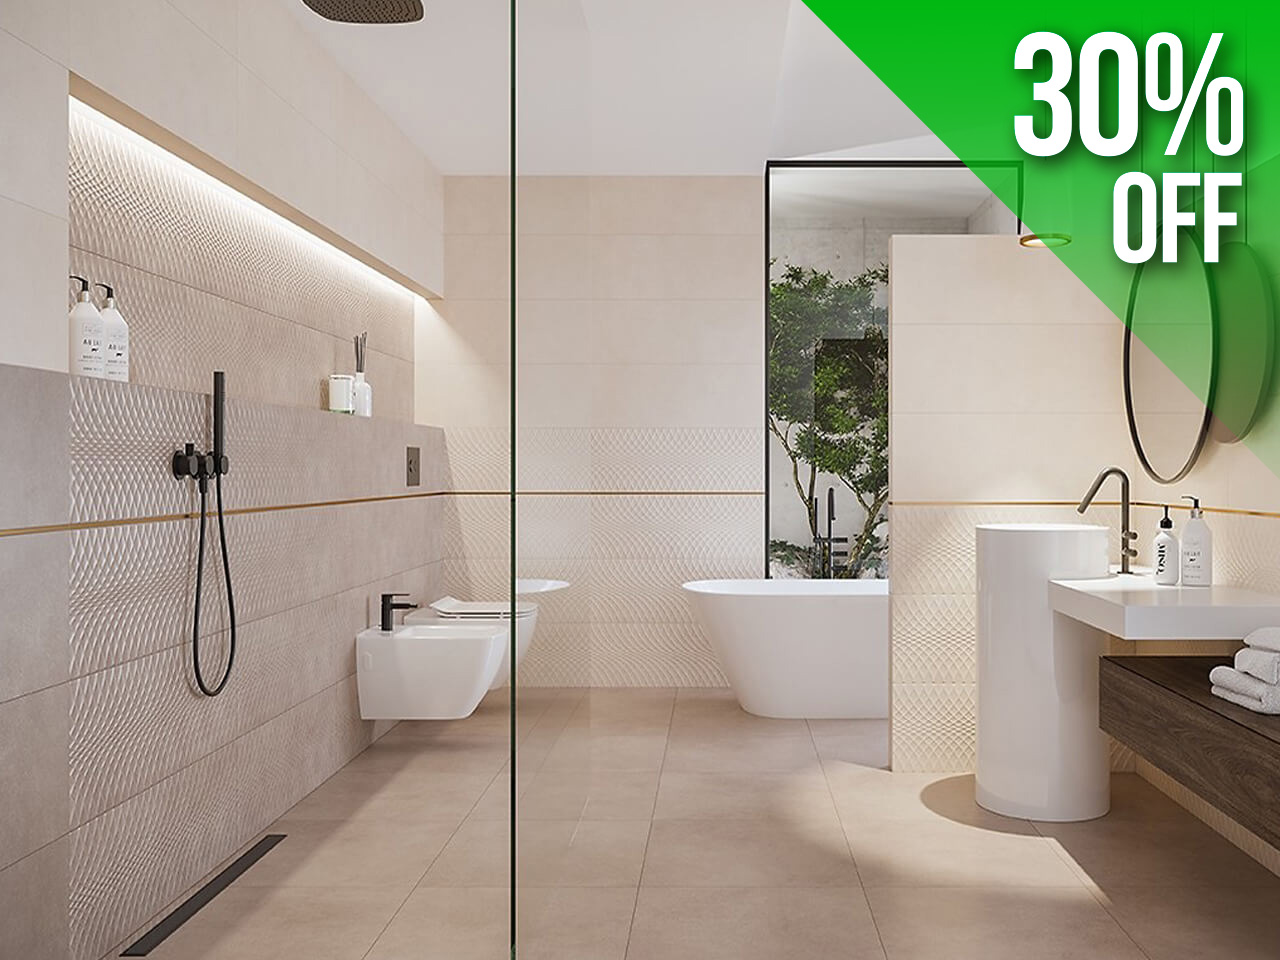 Arego Touch Wall and Floor Bathroom Tiles, discount 30%